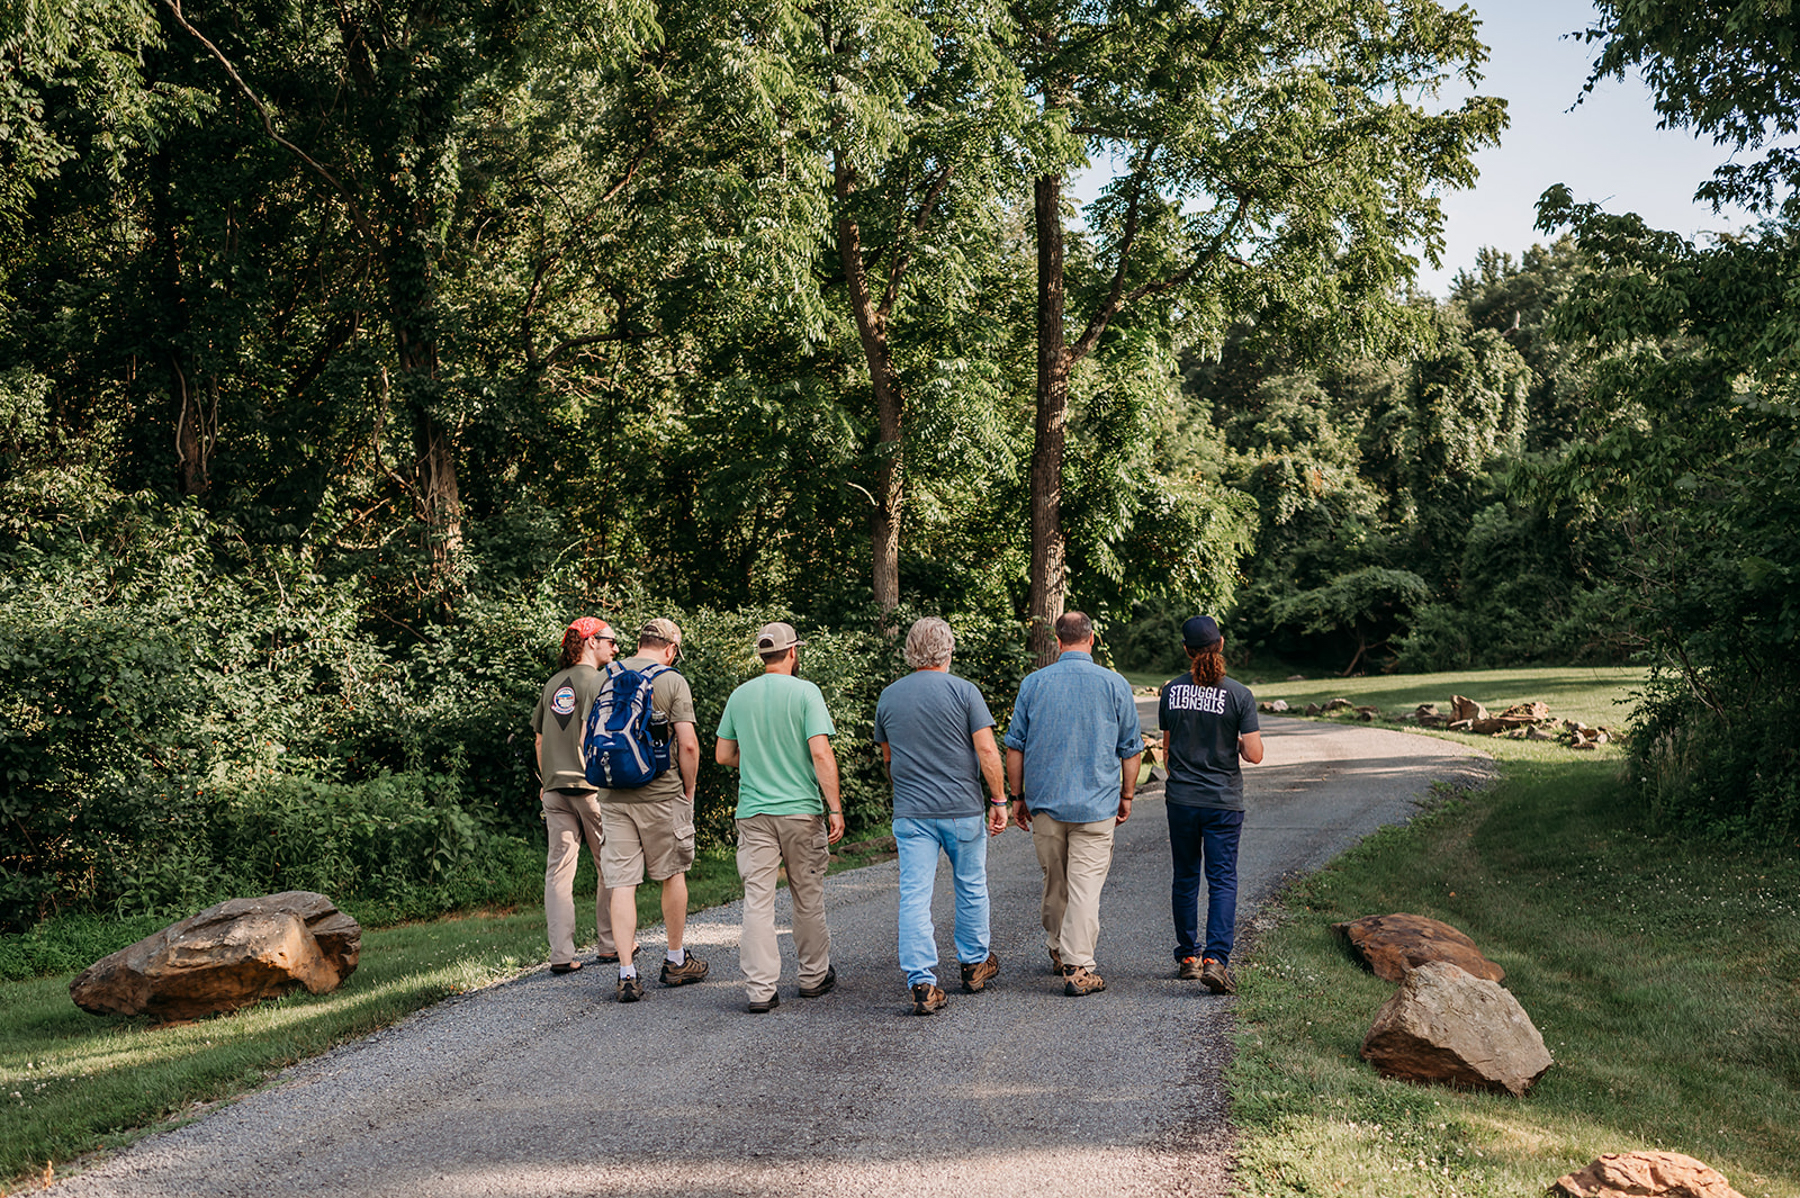 Custom website photography for Boulder Crest by Jenny Sessoms. The team walking through the institute property